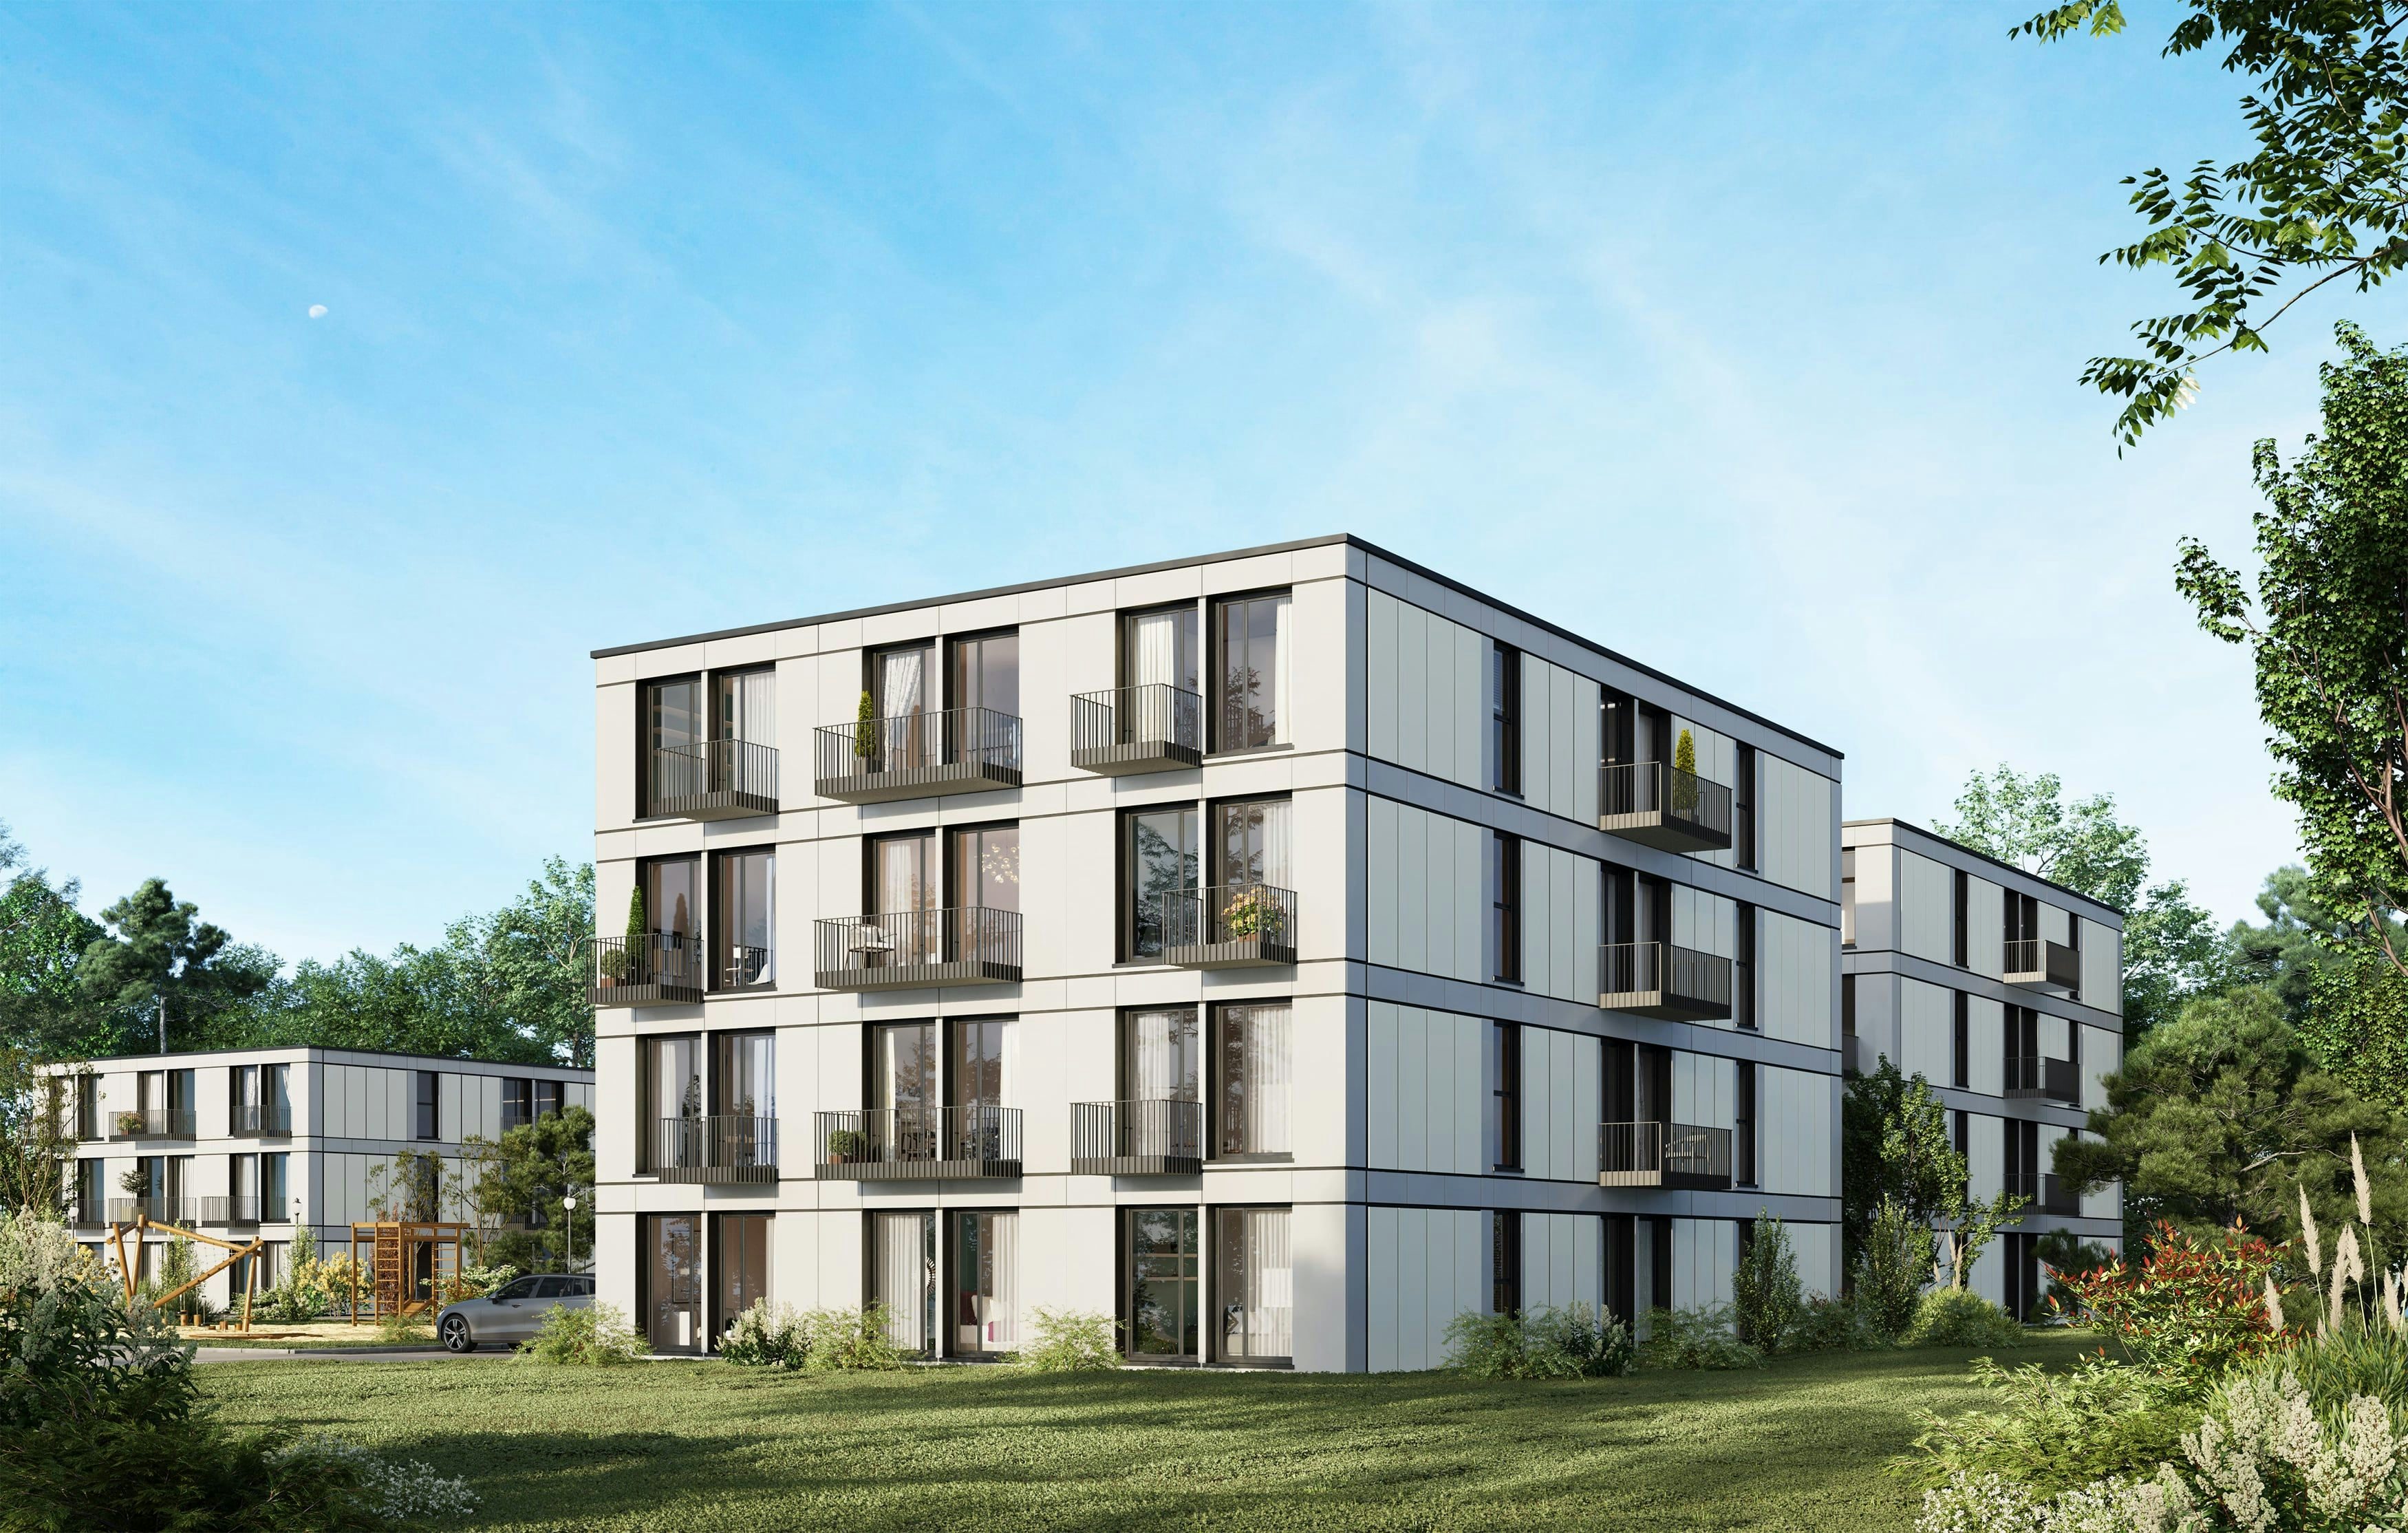 3D Exterior visualization of complex of prefabricated modular multifamily houses in Germany